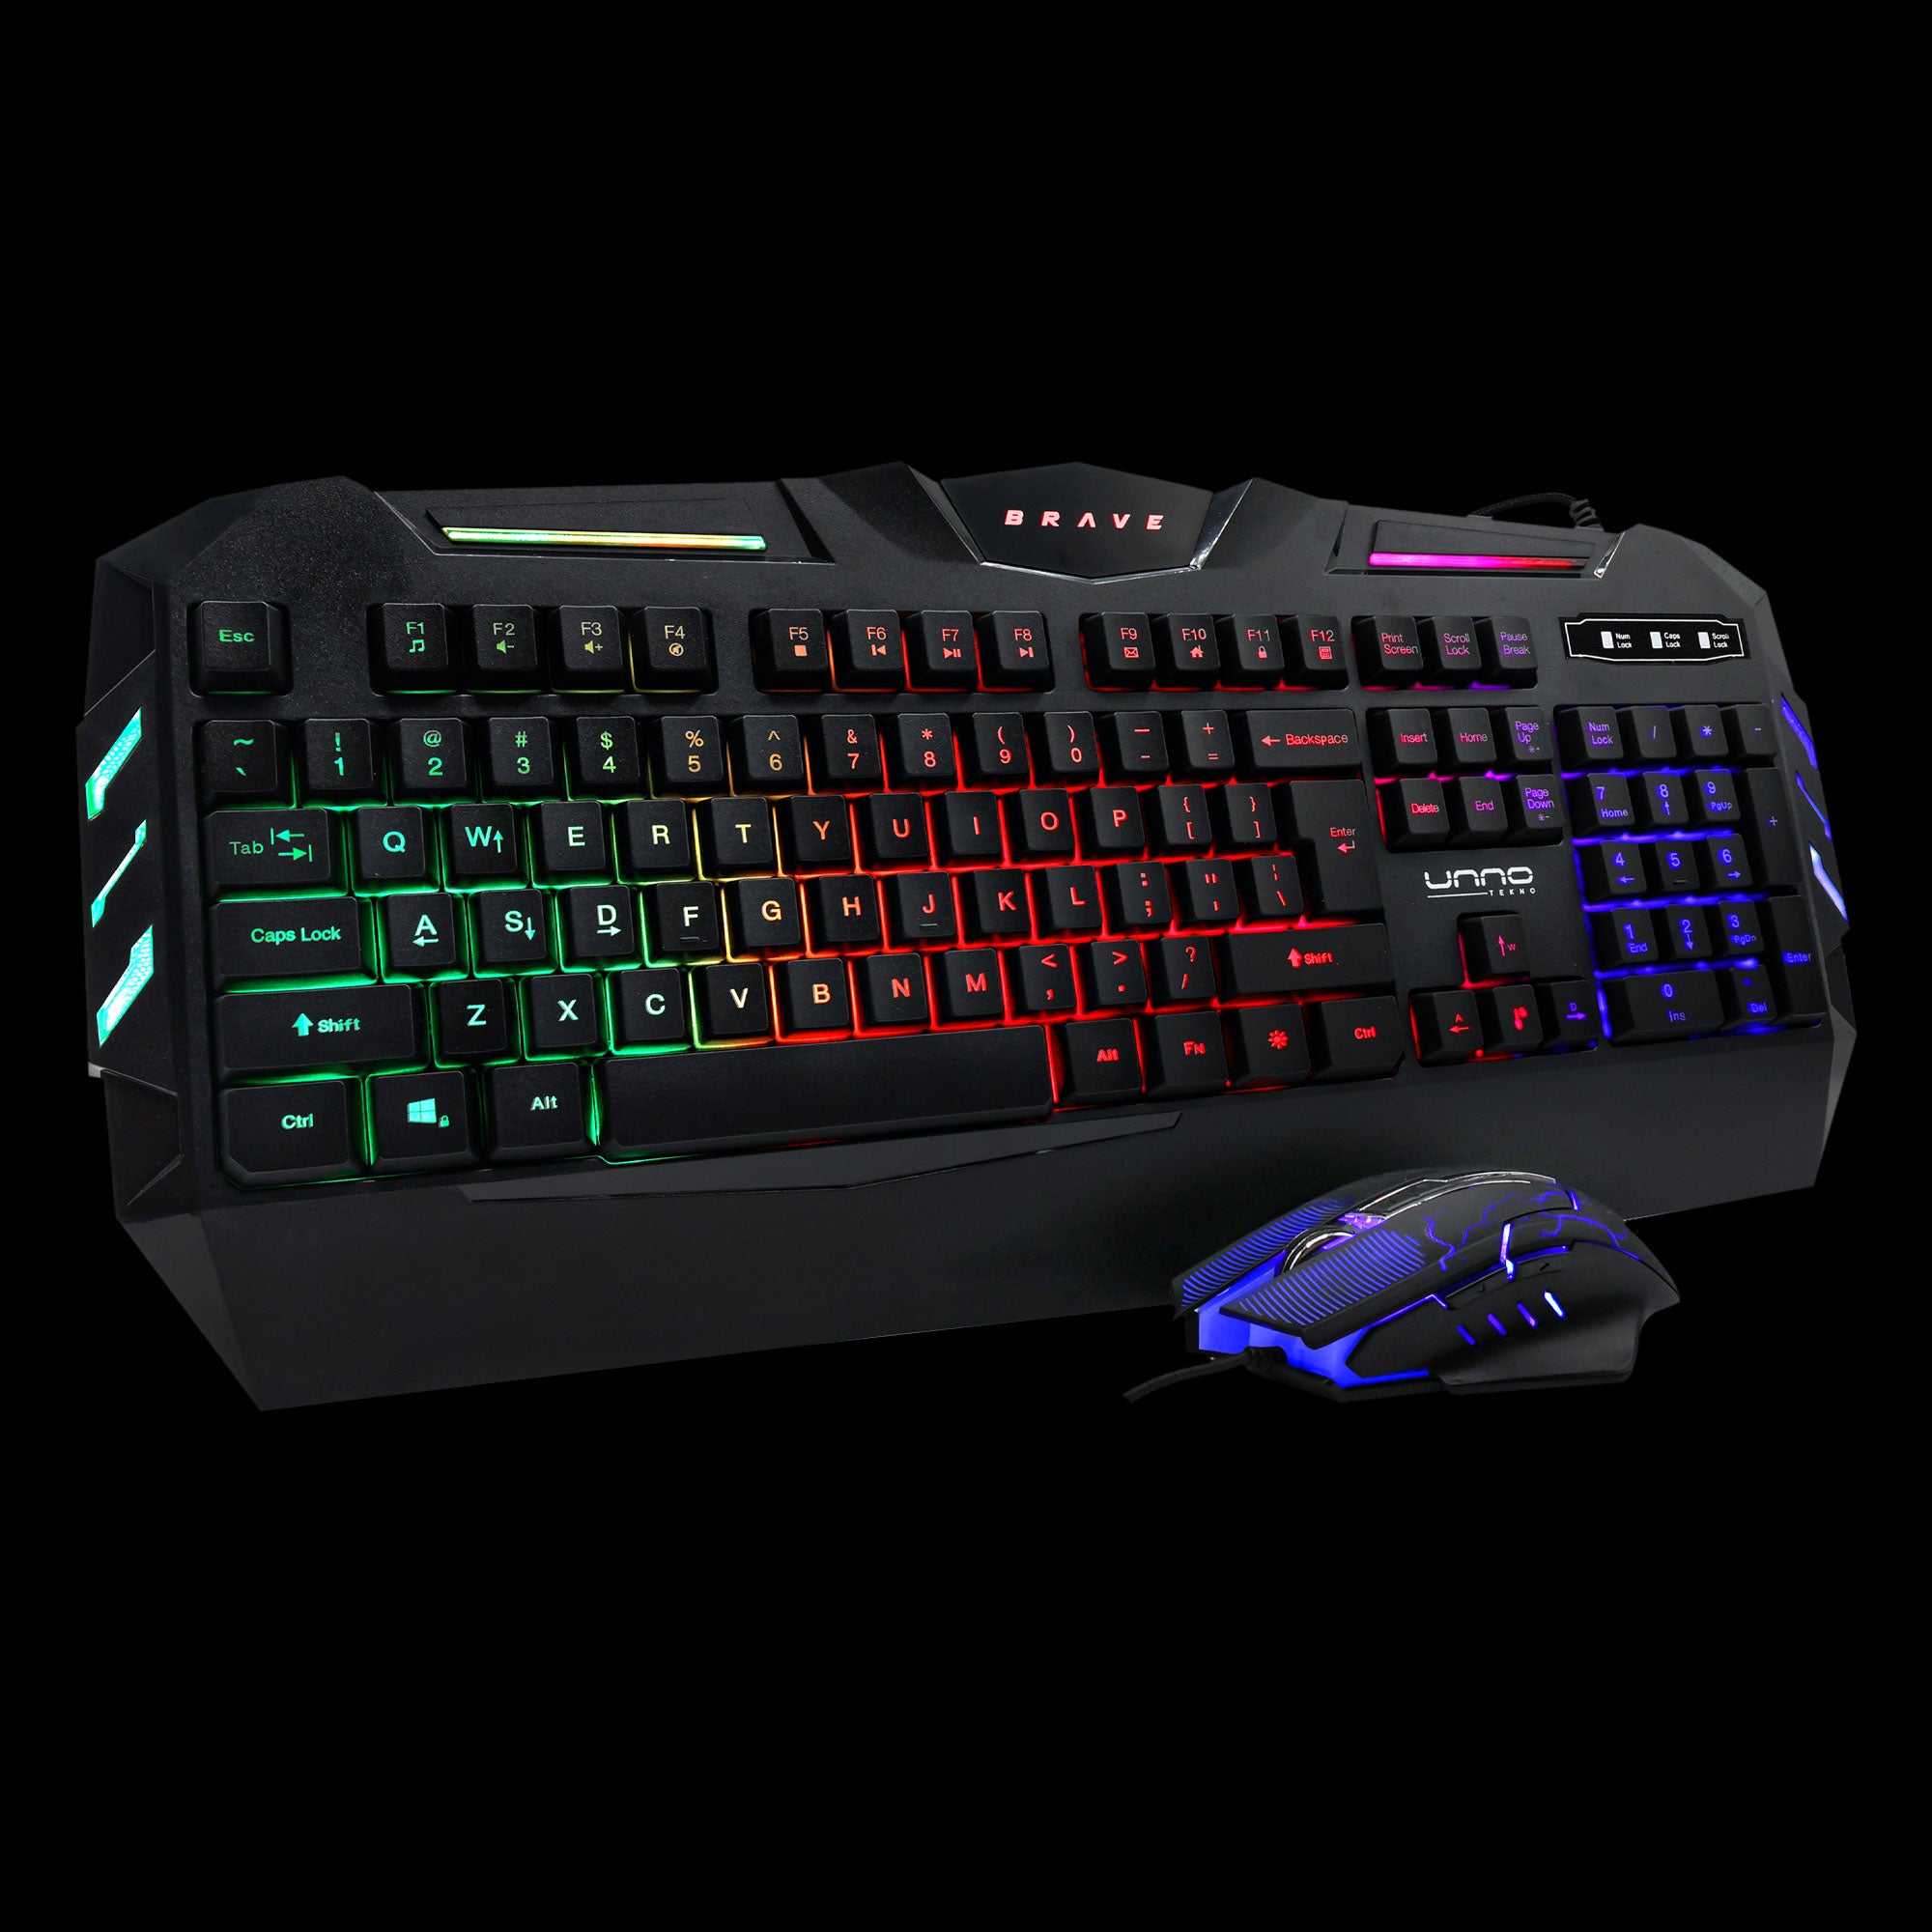 KEYBOARD & MOUSE COMBO FOR GAMING